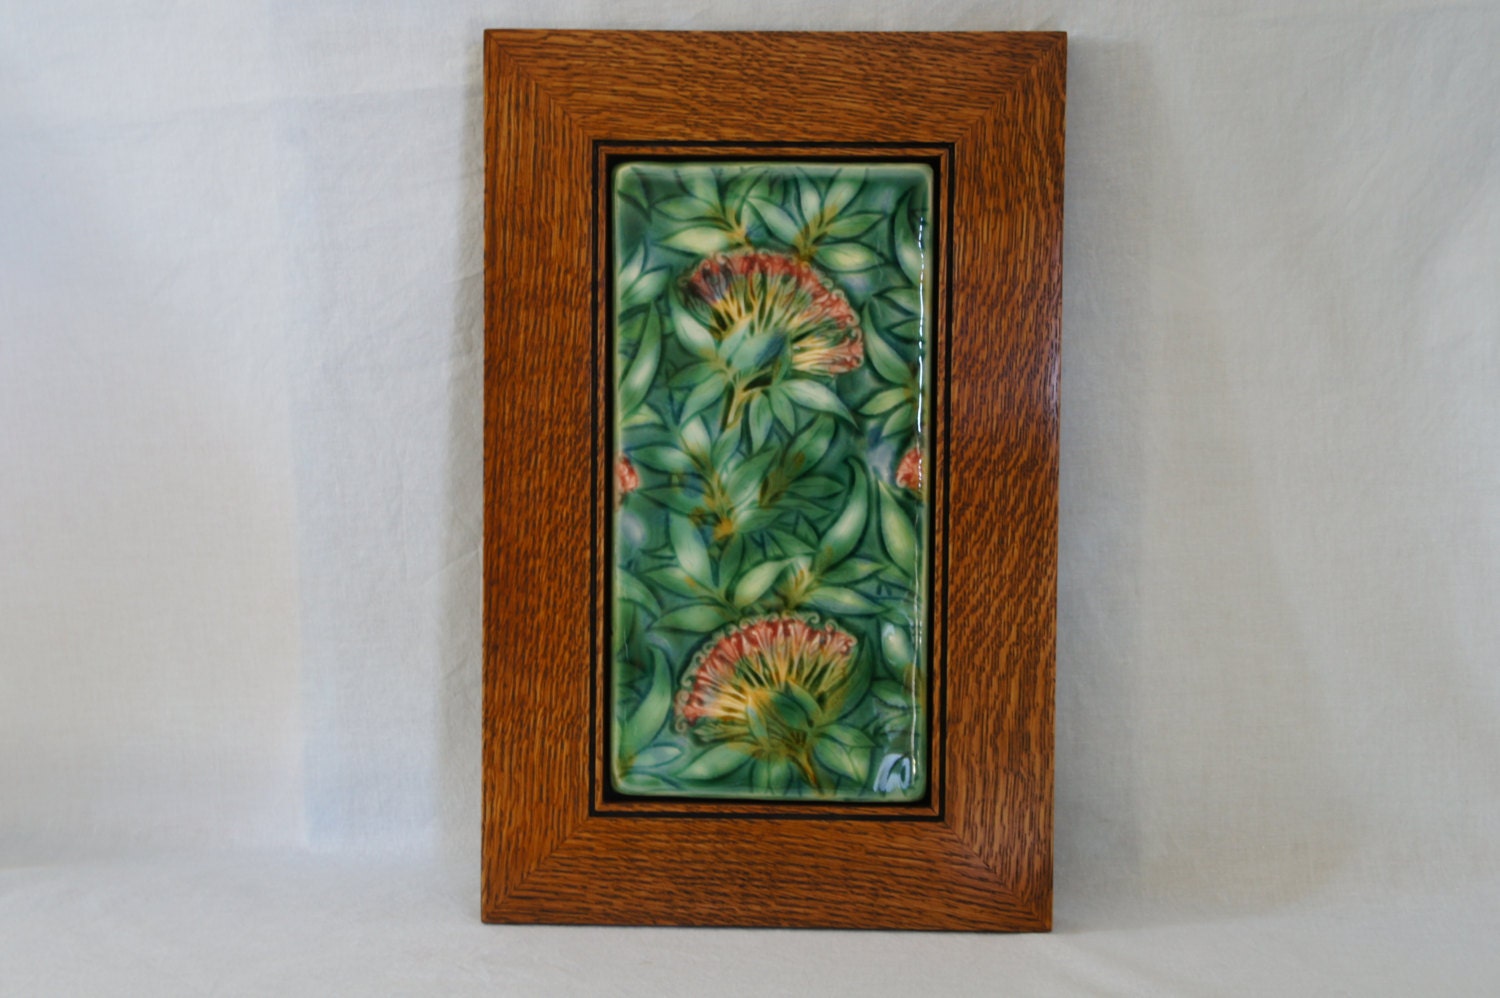 Framed Art Tile Arts & Crafts style Wall Art by KevinKapinArtisan